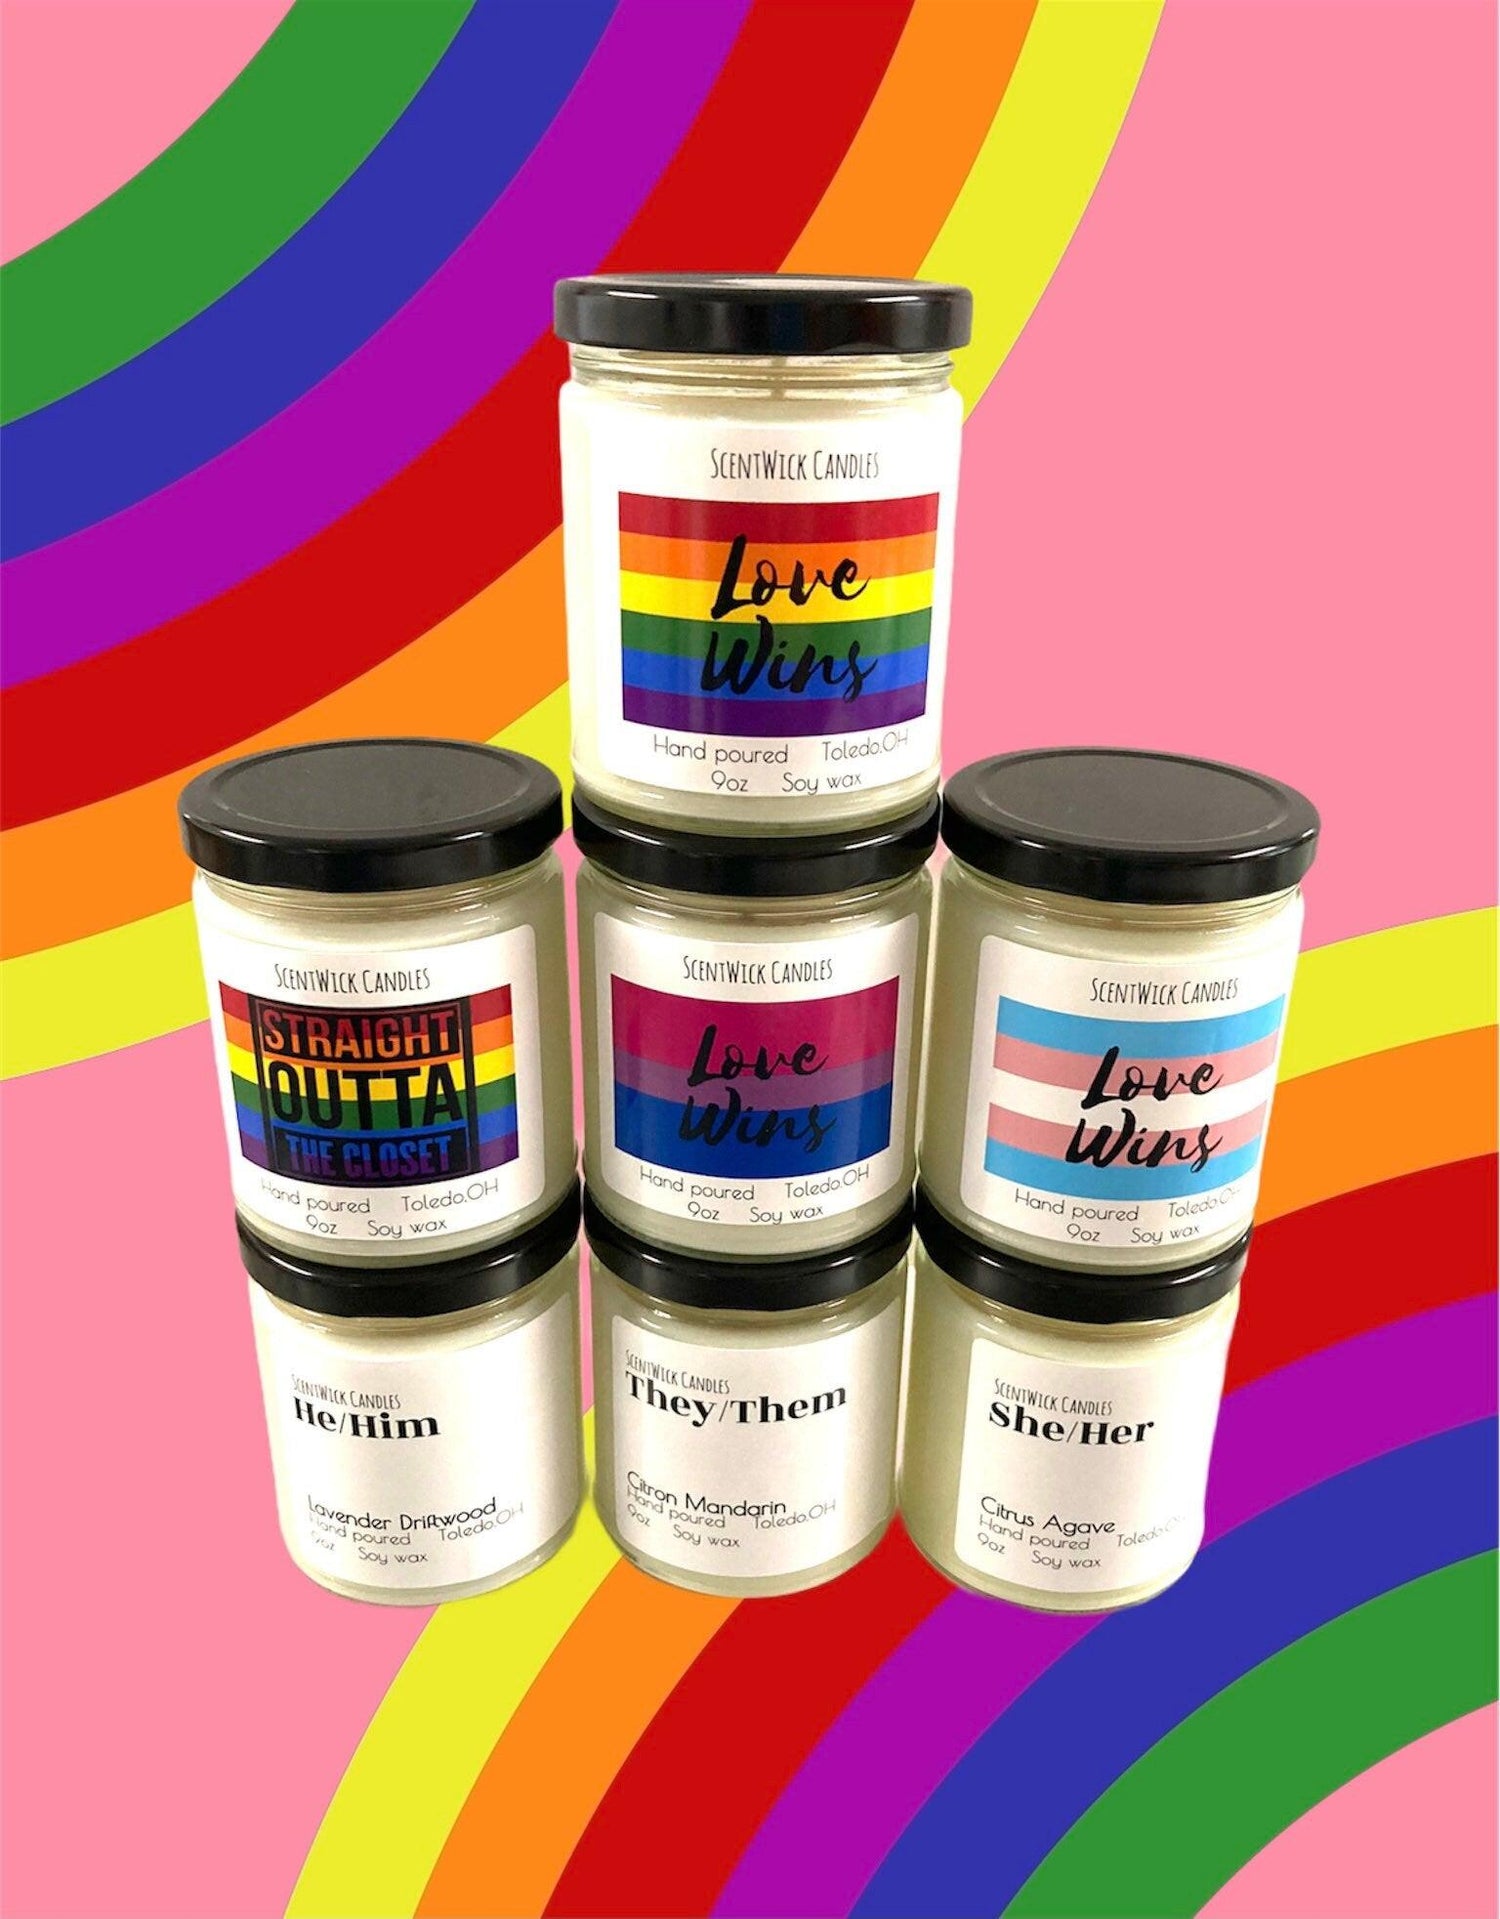 They/Them Pronouns Pride Candle - ScentWick Candles